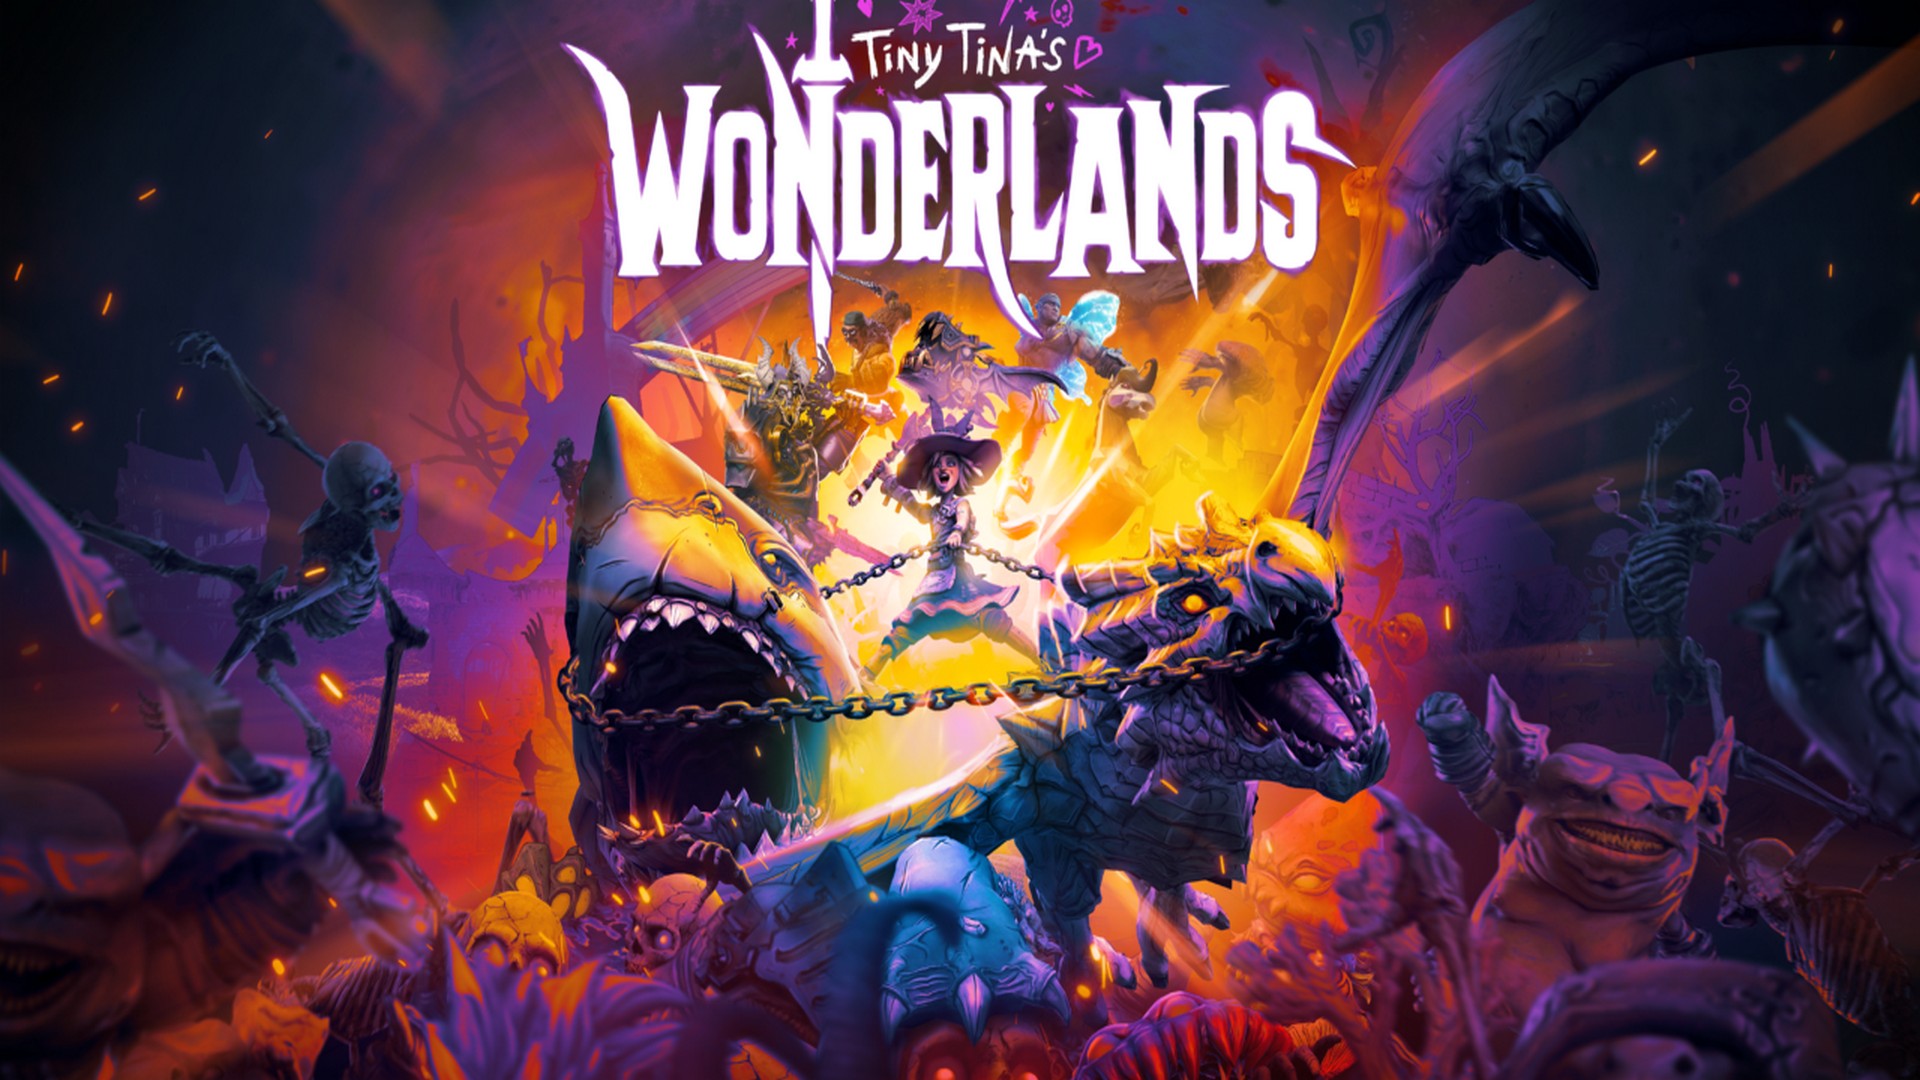 Tiny Tina’s Wonderlands – Releasing On Steam On June 24 In Australia and New Zealand